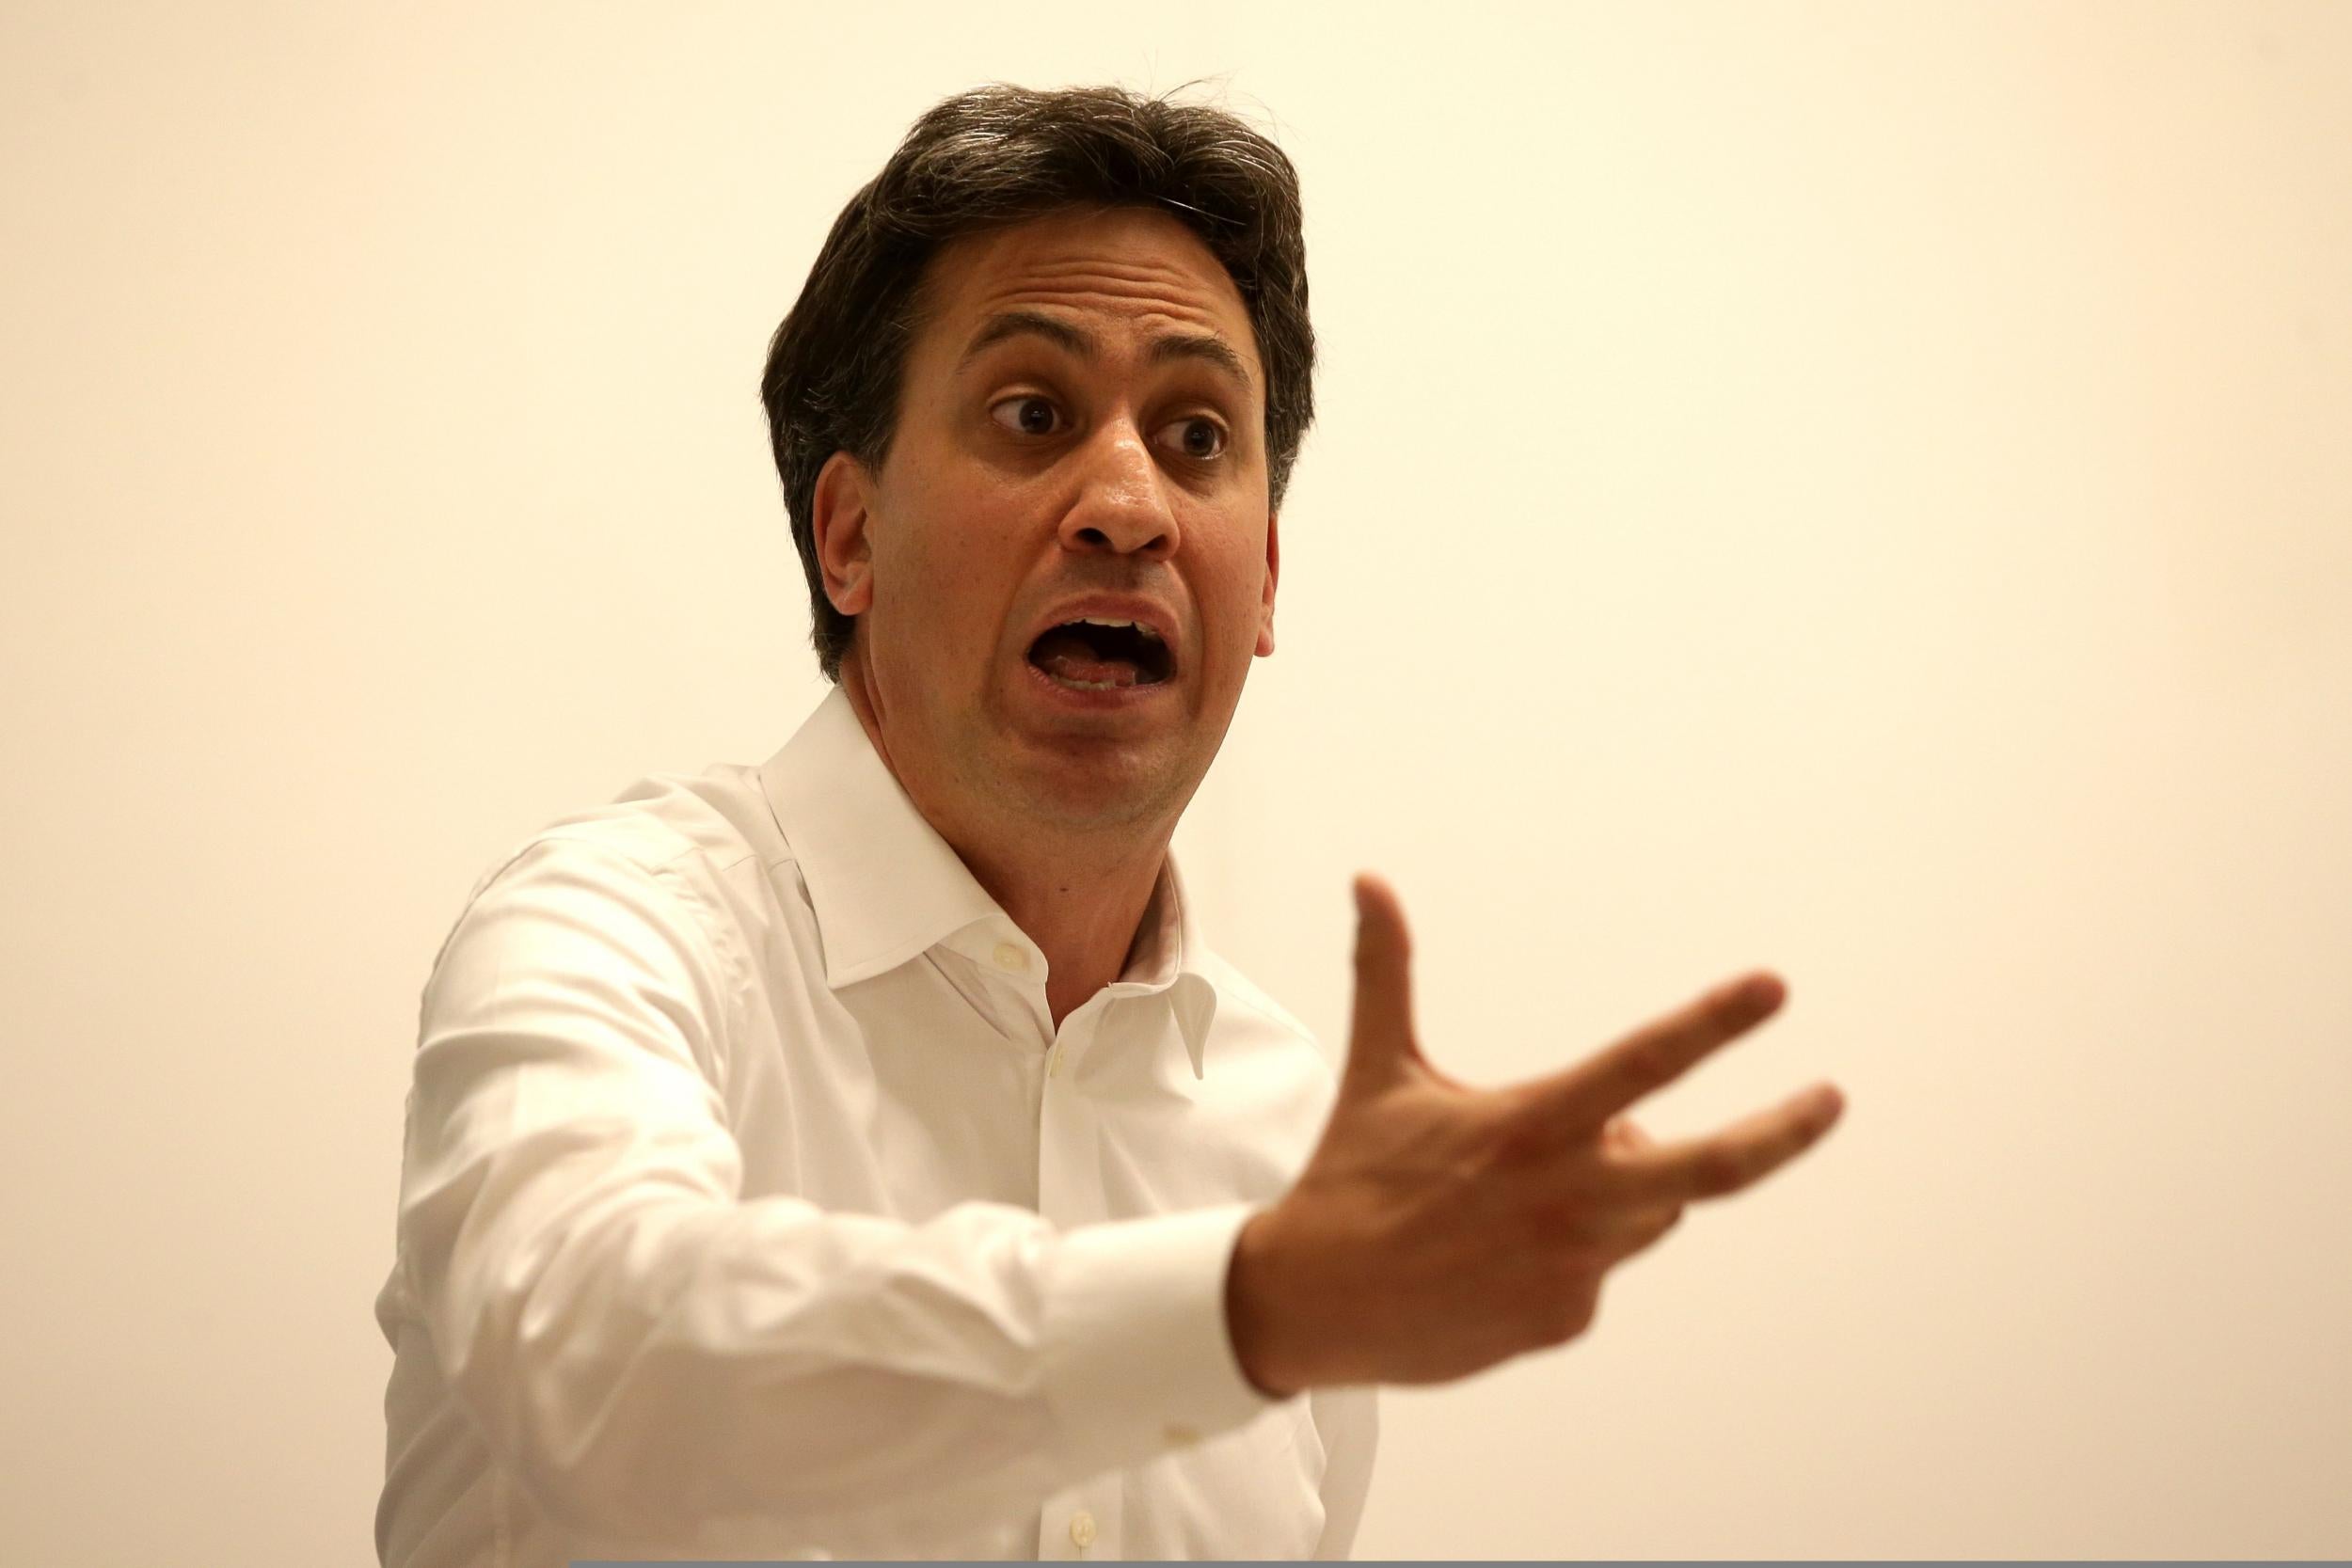 Ed Miliband says carbon-neutral steelmaking is within reach, with proper investment